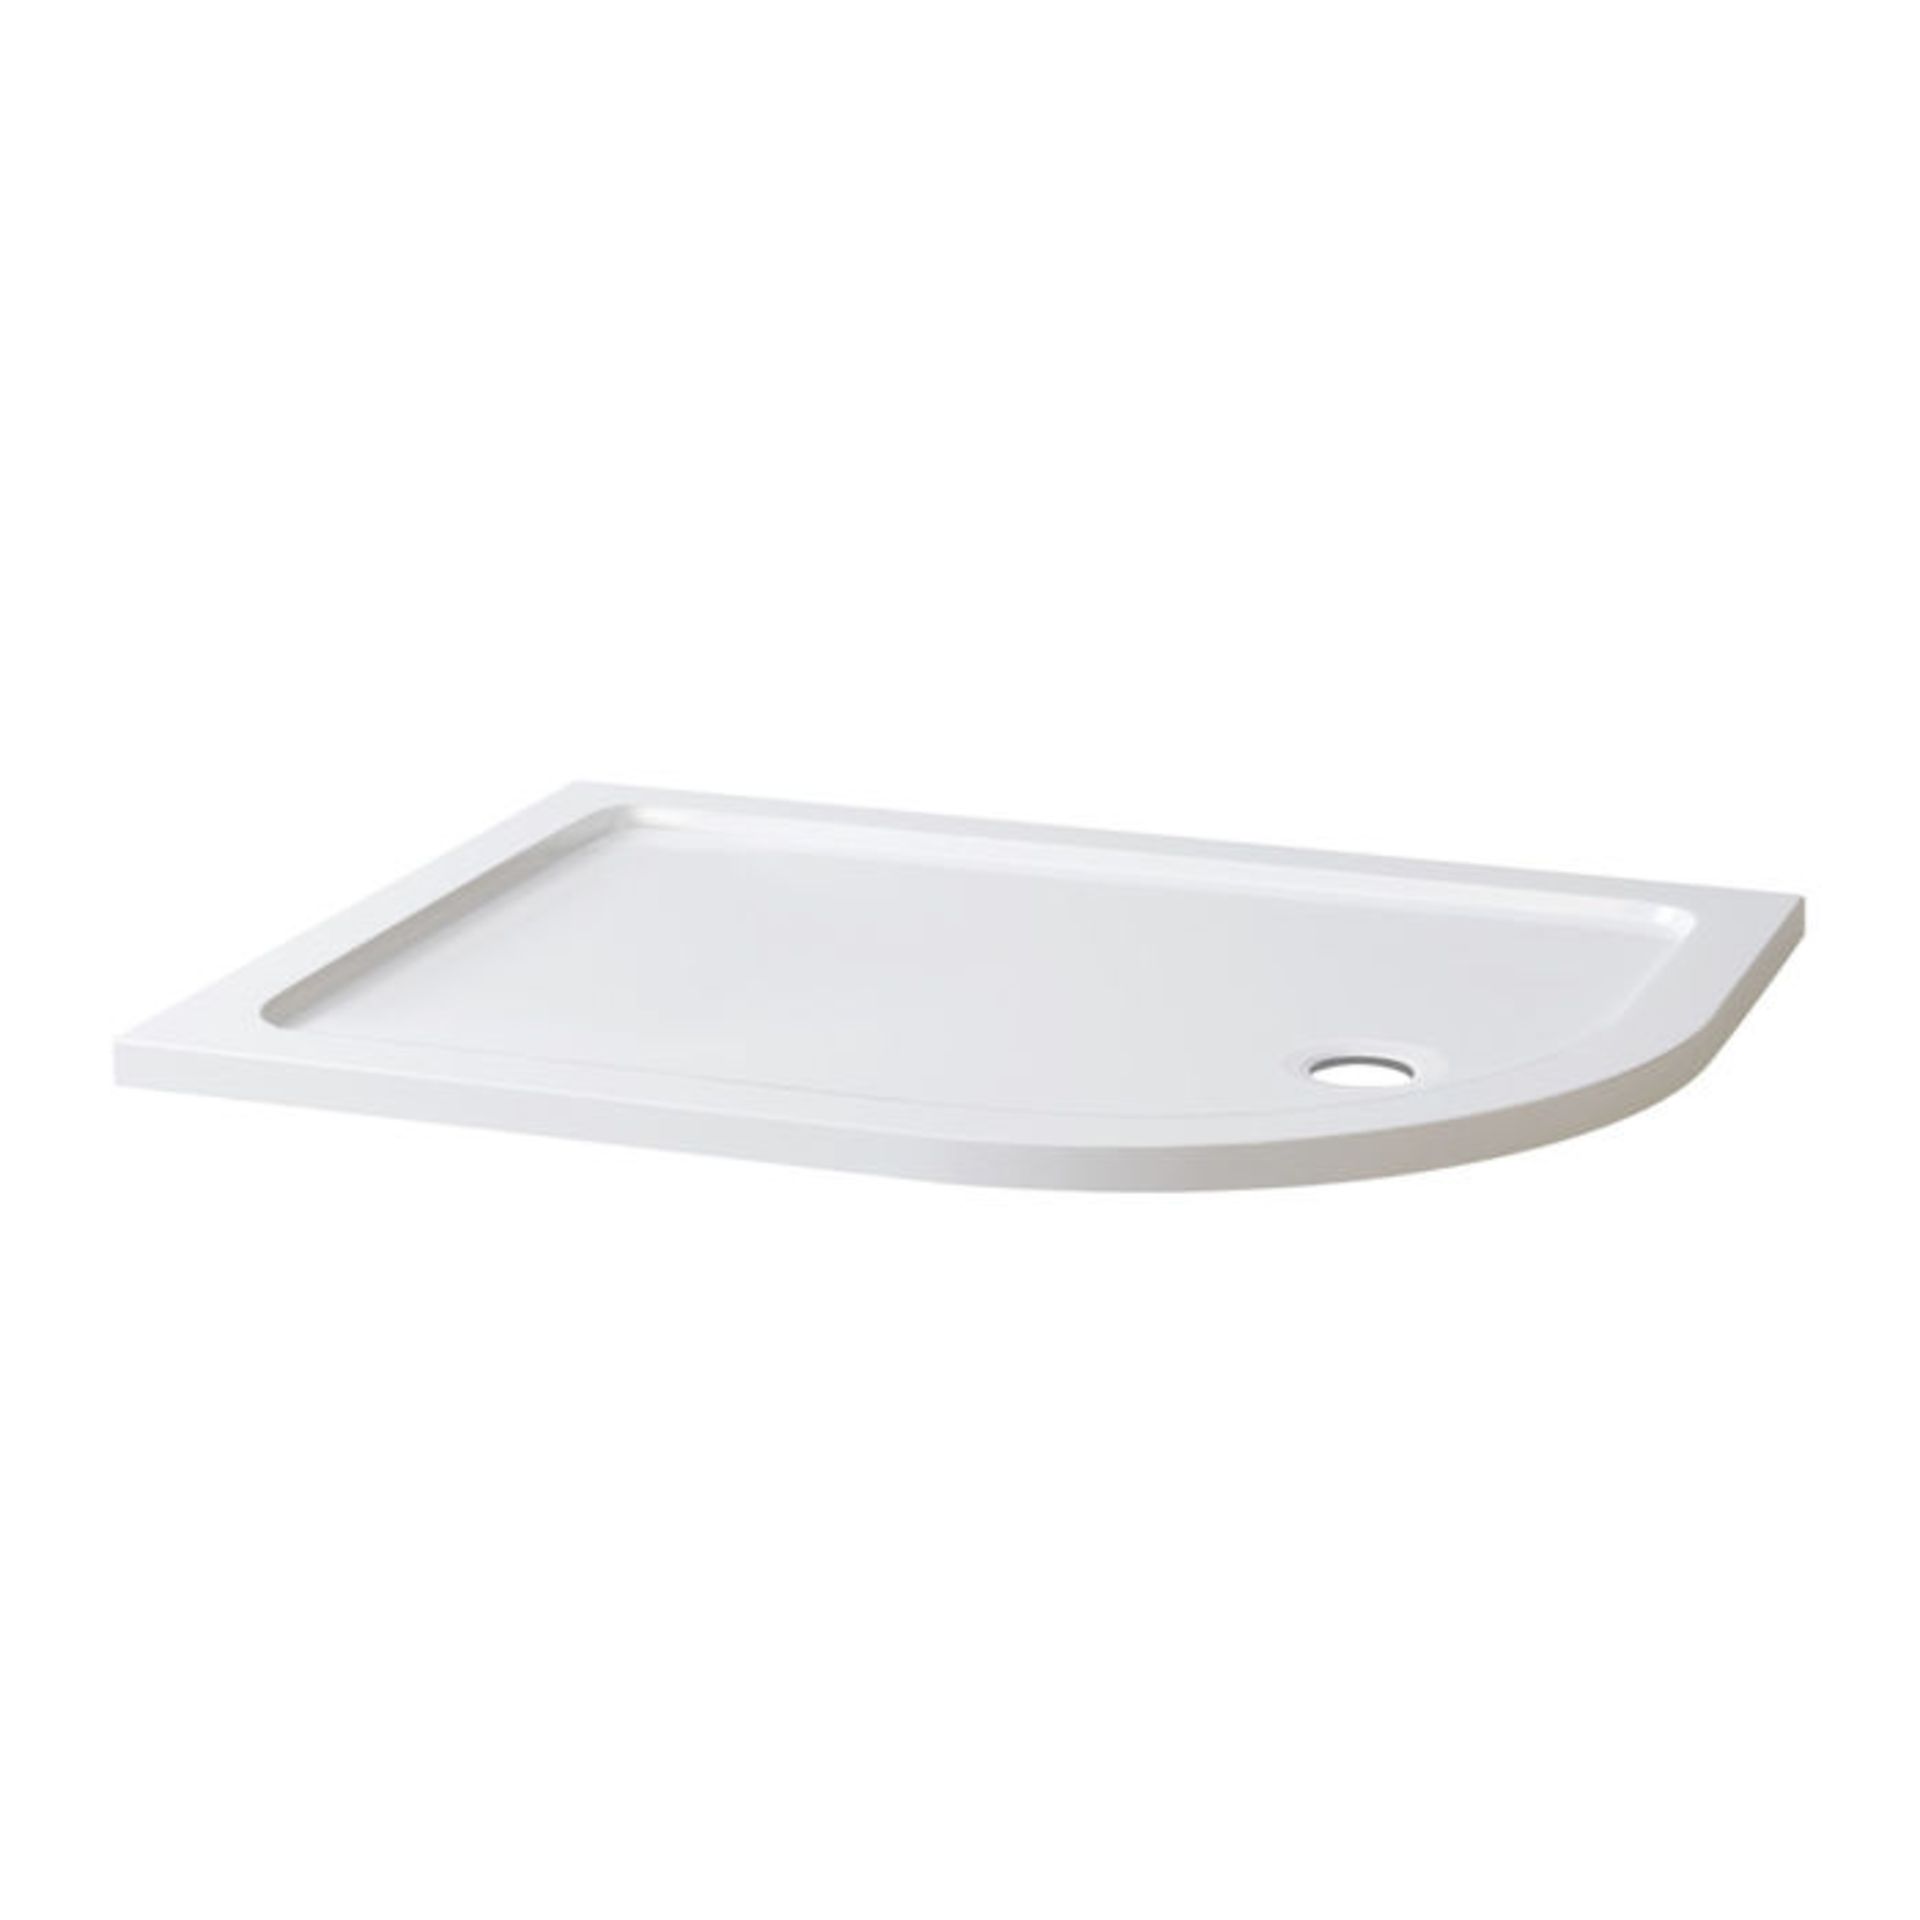 (TY61) 1200x900mm Offset Quadrant Ultra Slim Stone Shower Tray - Right. Low profile ultra slim - Image 2 of 2